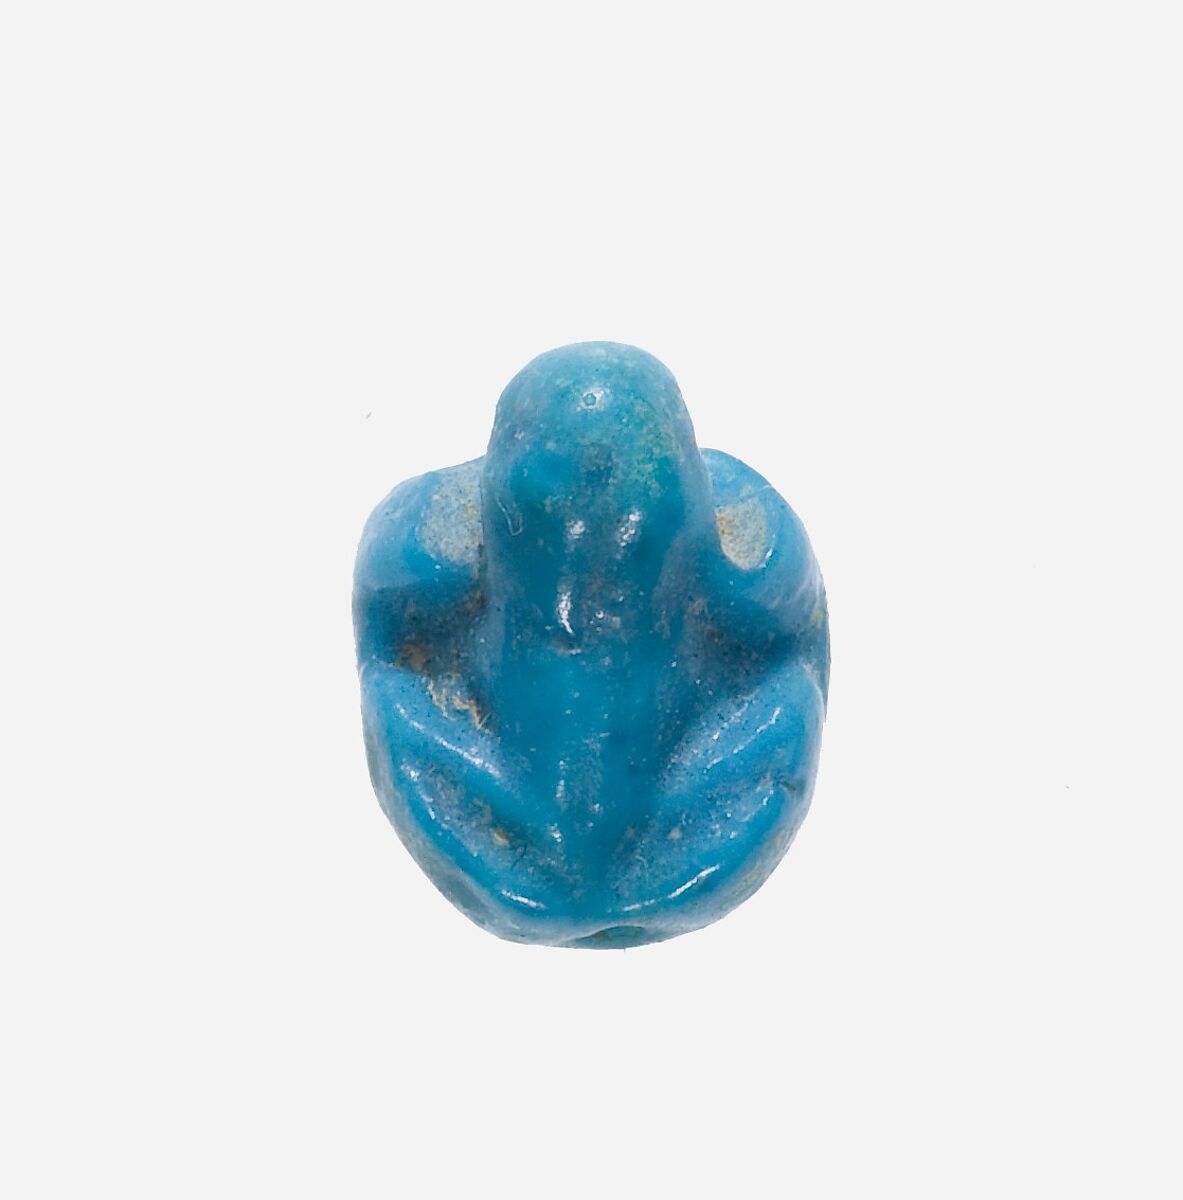 Frog Seal Amulet with a City Hieroglyph (?) on the Base, Faience 